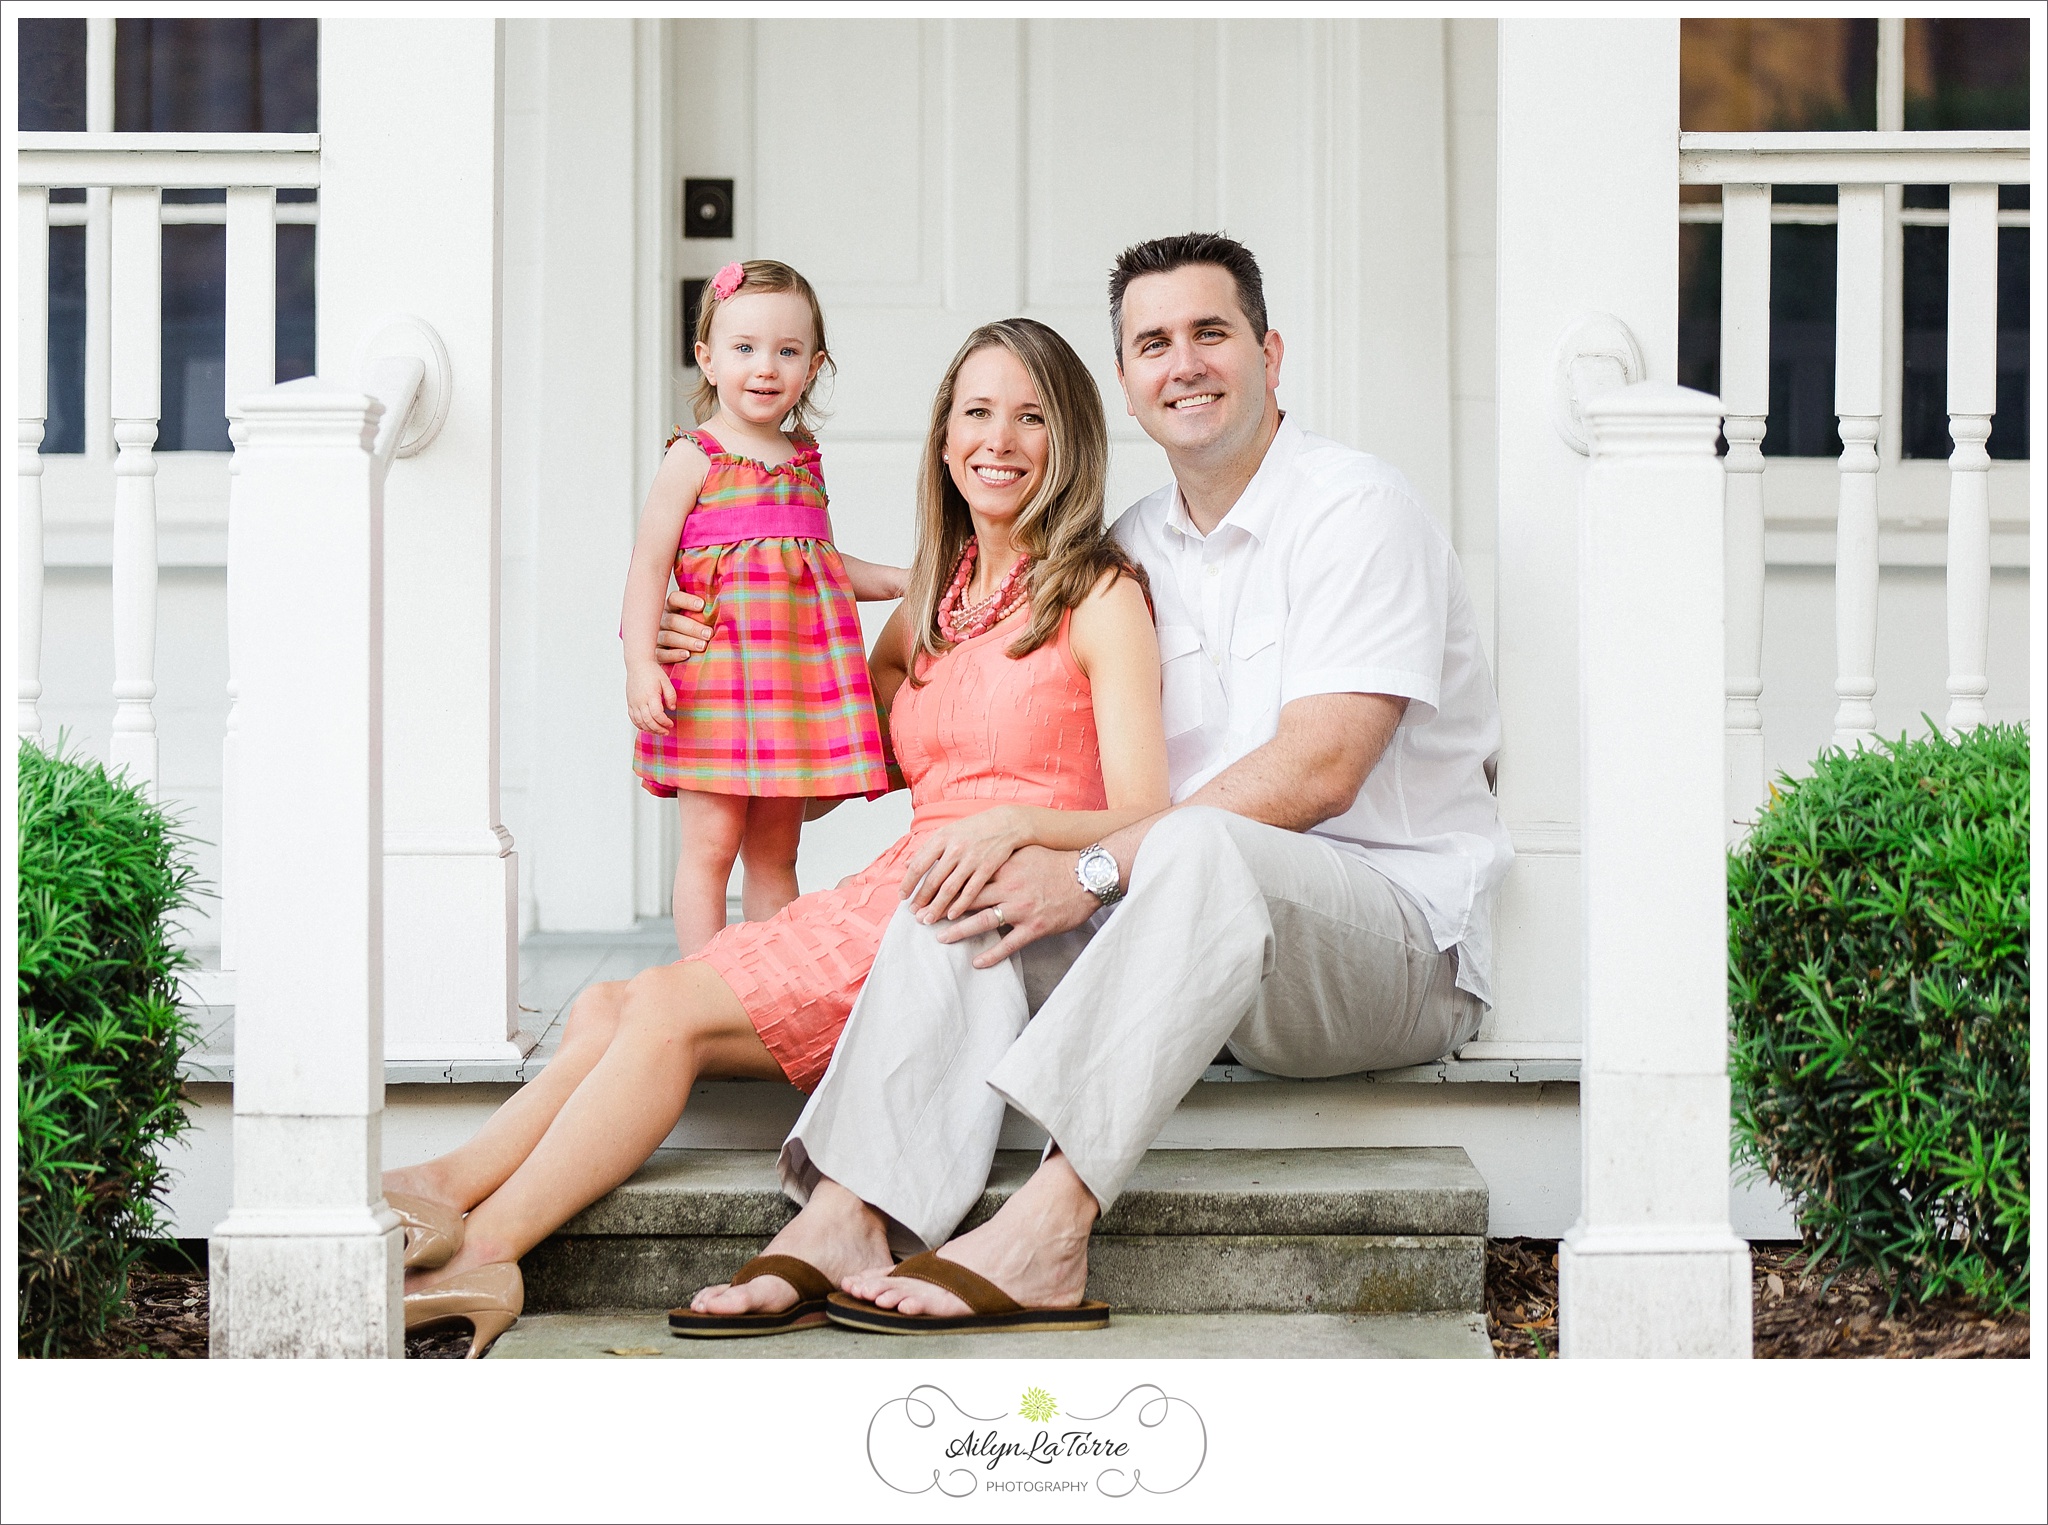 Tampa Holiday Mini Session | © Ailyn La Torre Photography 2014